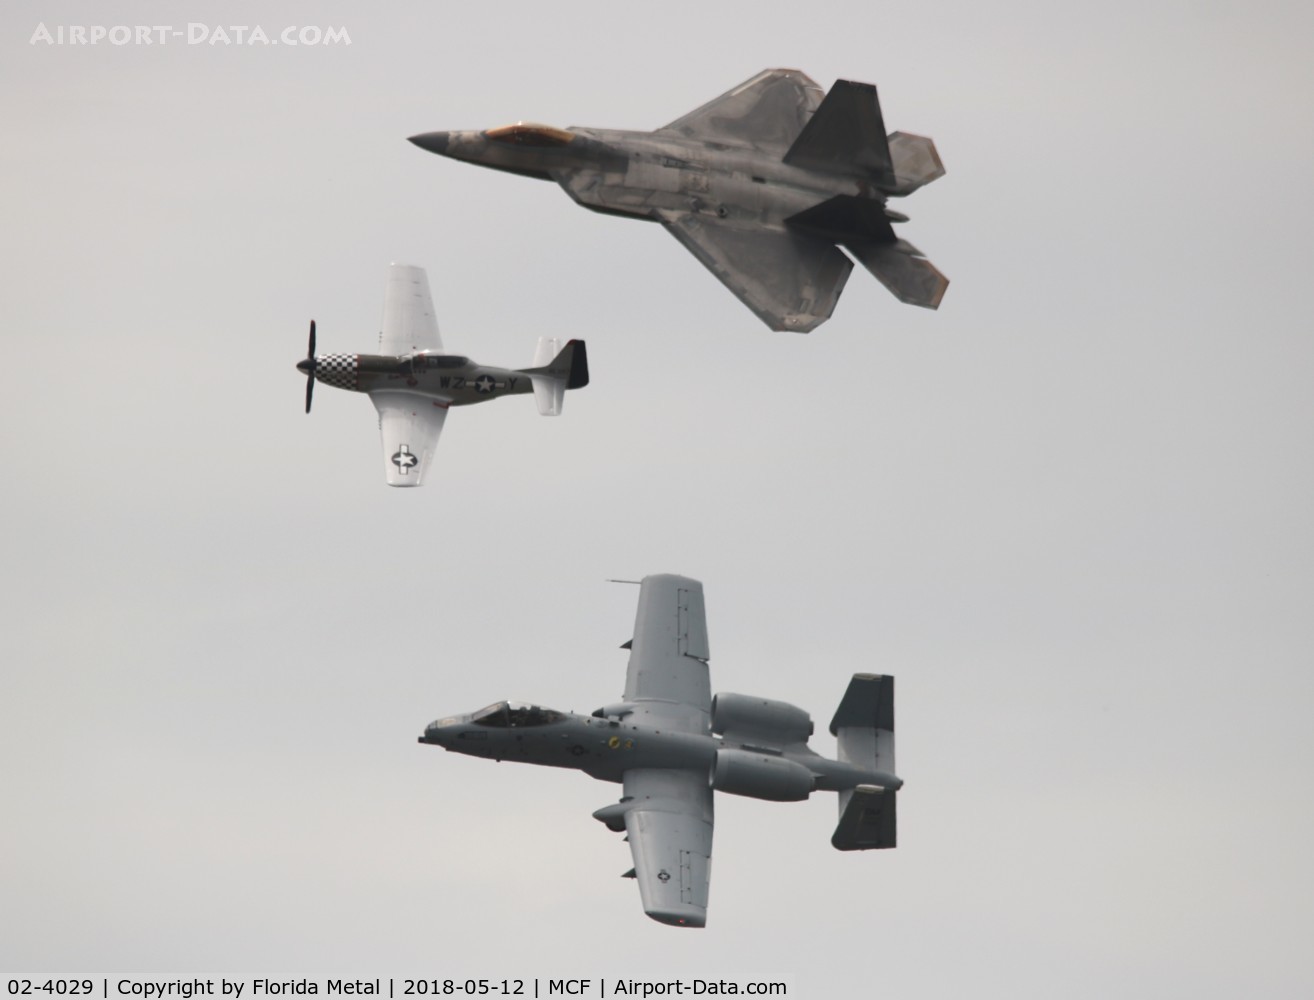 02-4029, 2002 Lockheed Martin F-22A Raptor C/N 645-4029, F-22 with P-51 and A-10